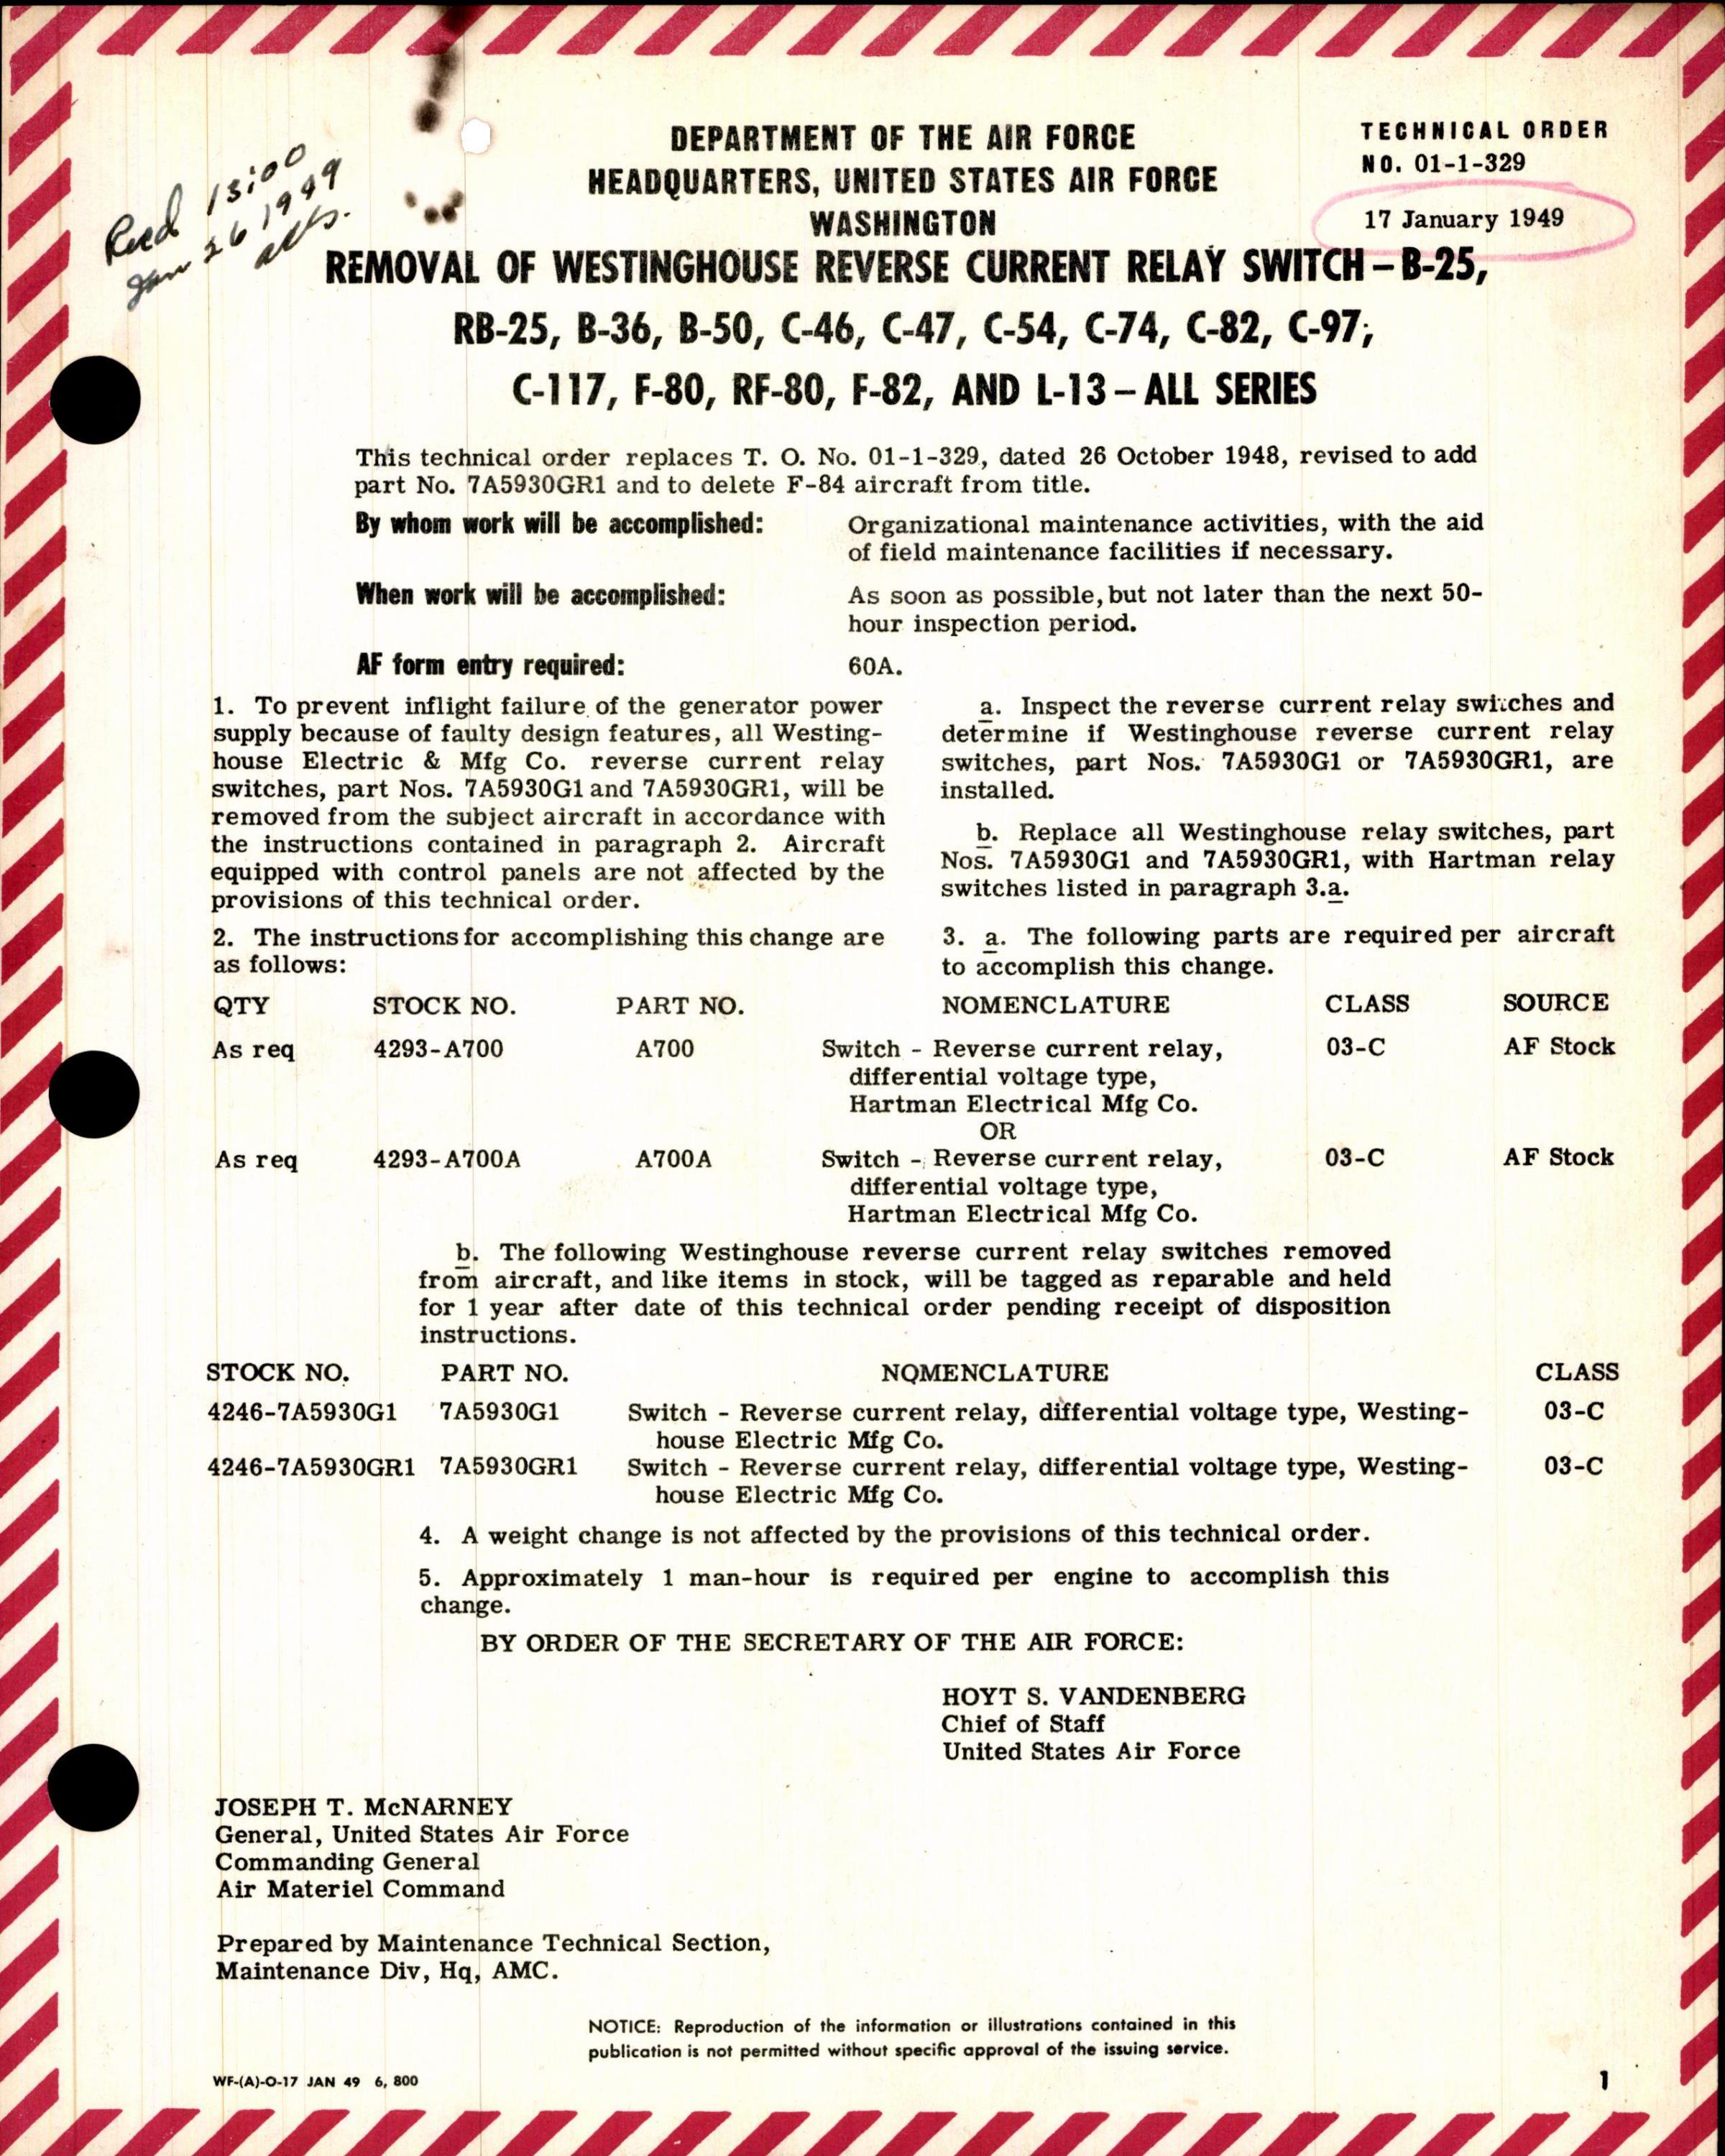 Sample page 1 from AirCorps Library document: Removal of Westinghouse Reverse Current Relay Switch